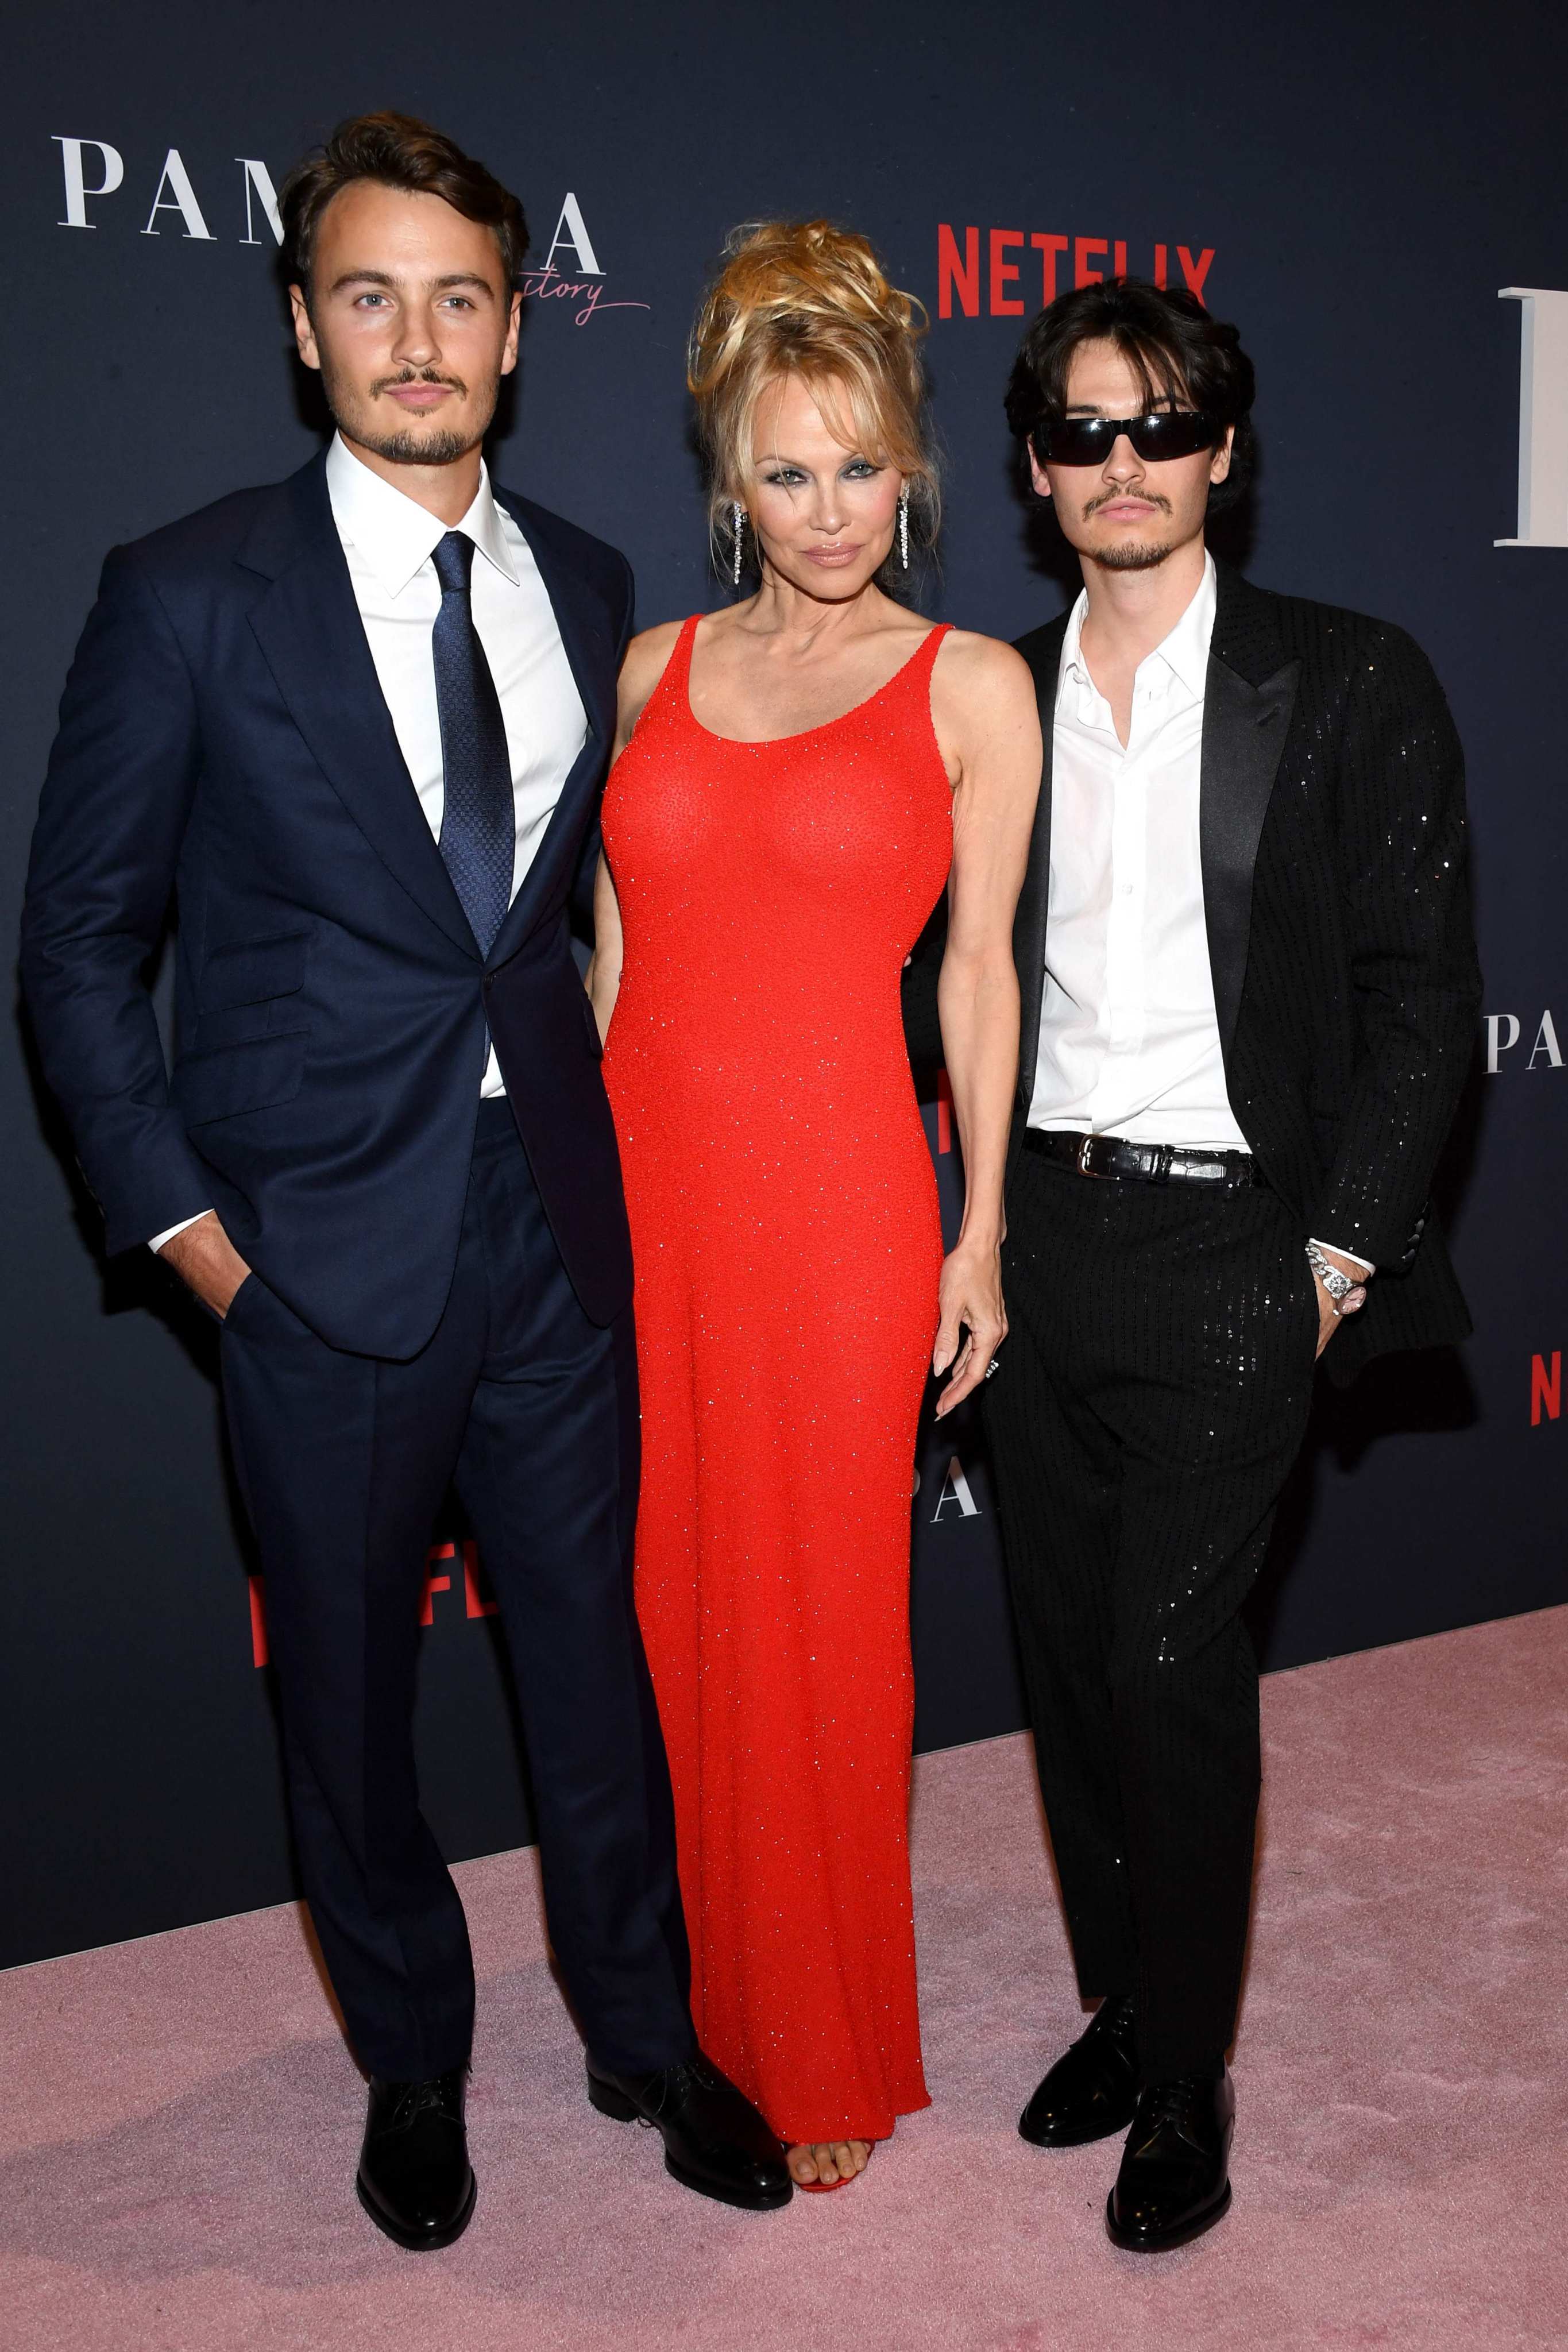 Brandon Thomas Lee, Pamela Anderson and Dylan Jagger Lee attend the premiere of Netflix’s Pamela, A Love Story at Tudum Theater on January 30, in Hollywood, California. Photo: Getty Images via AFP